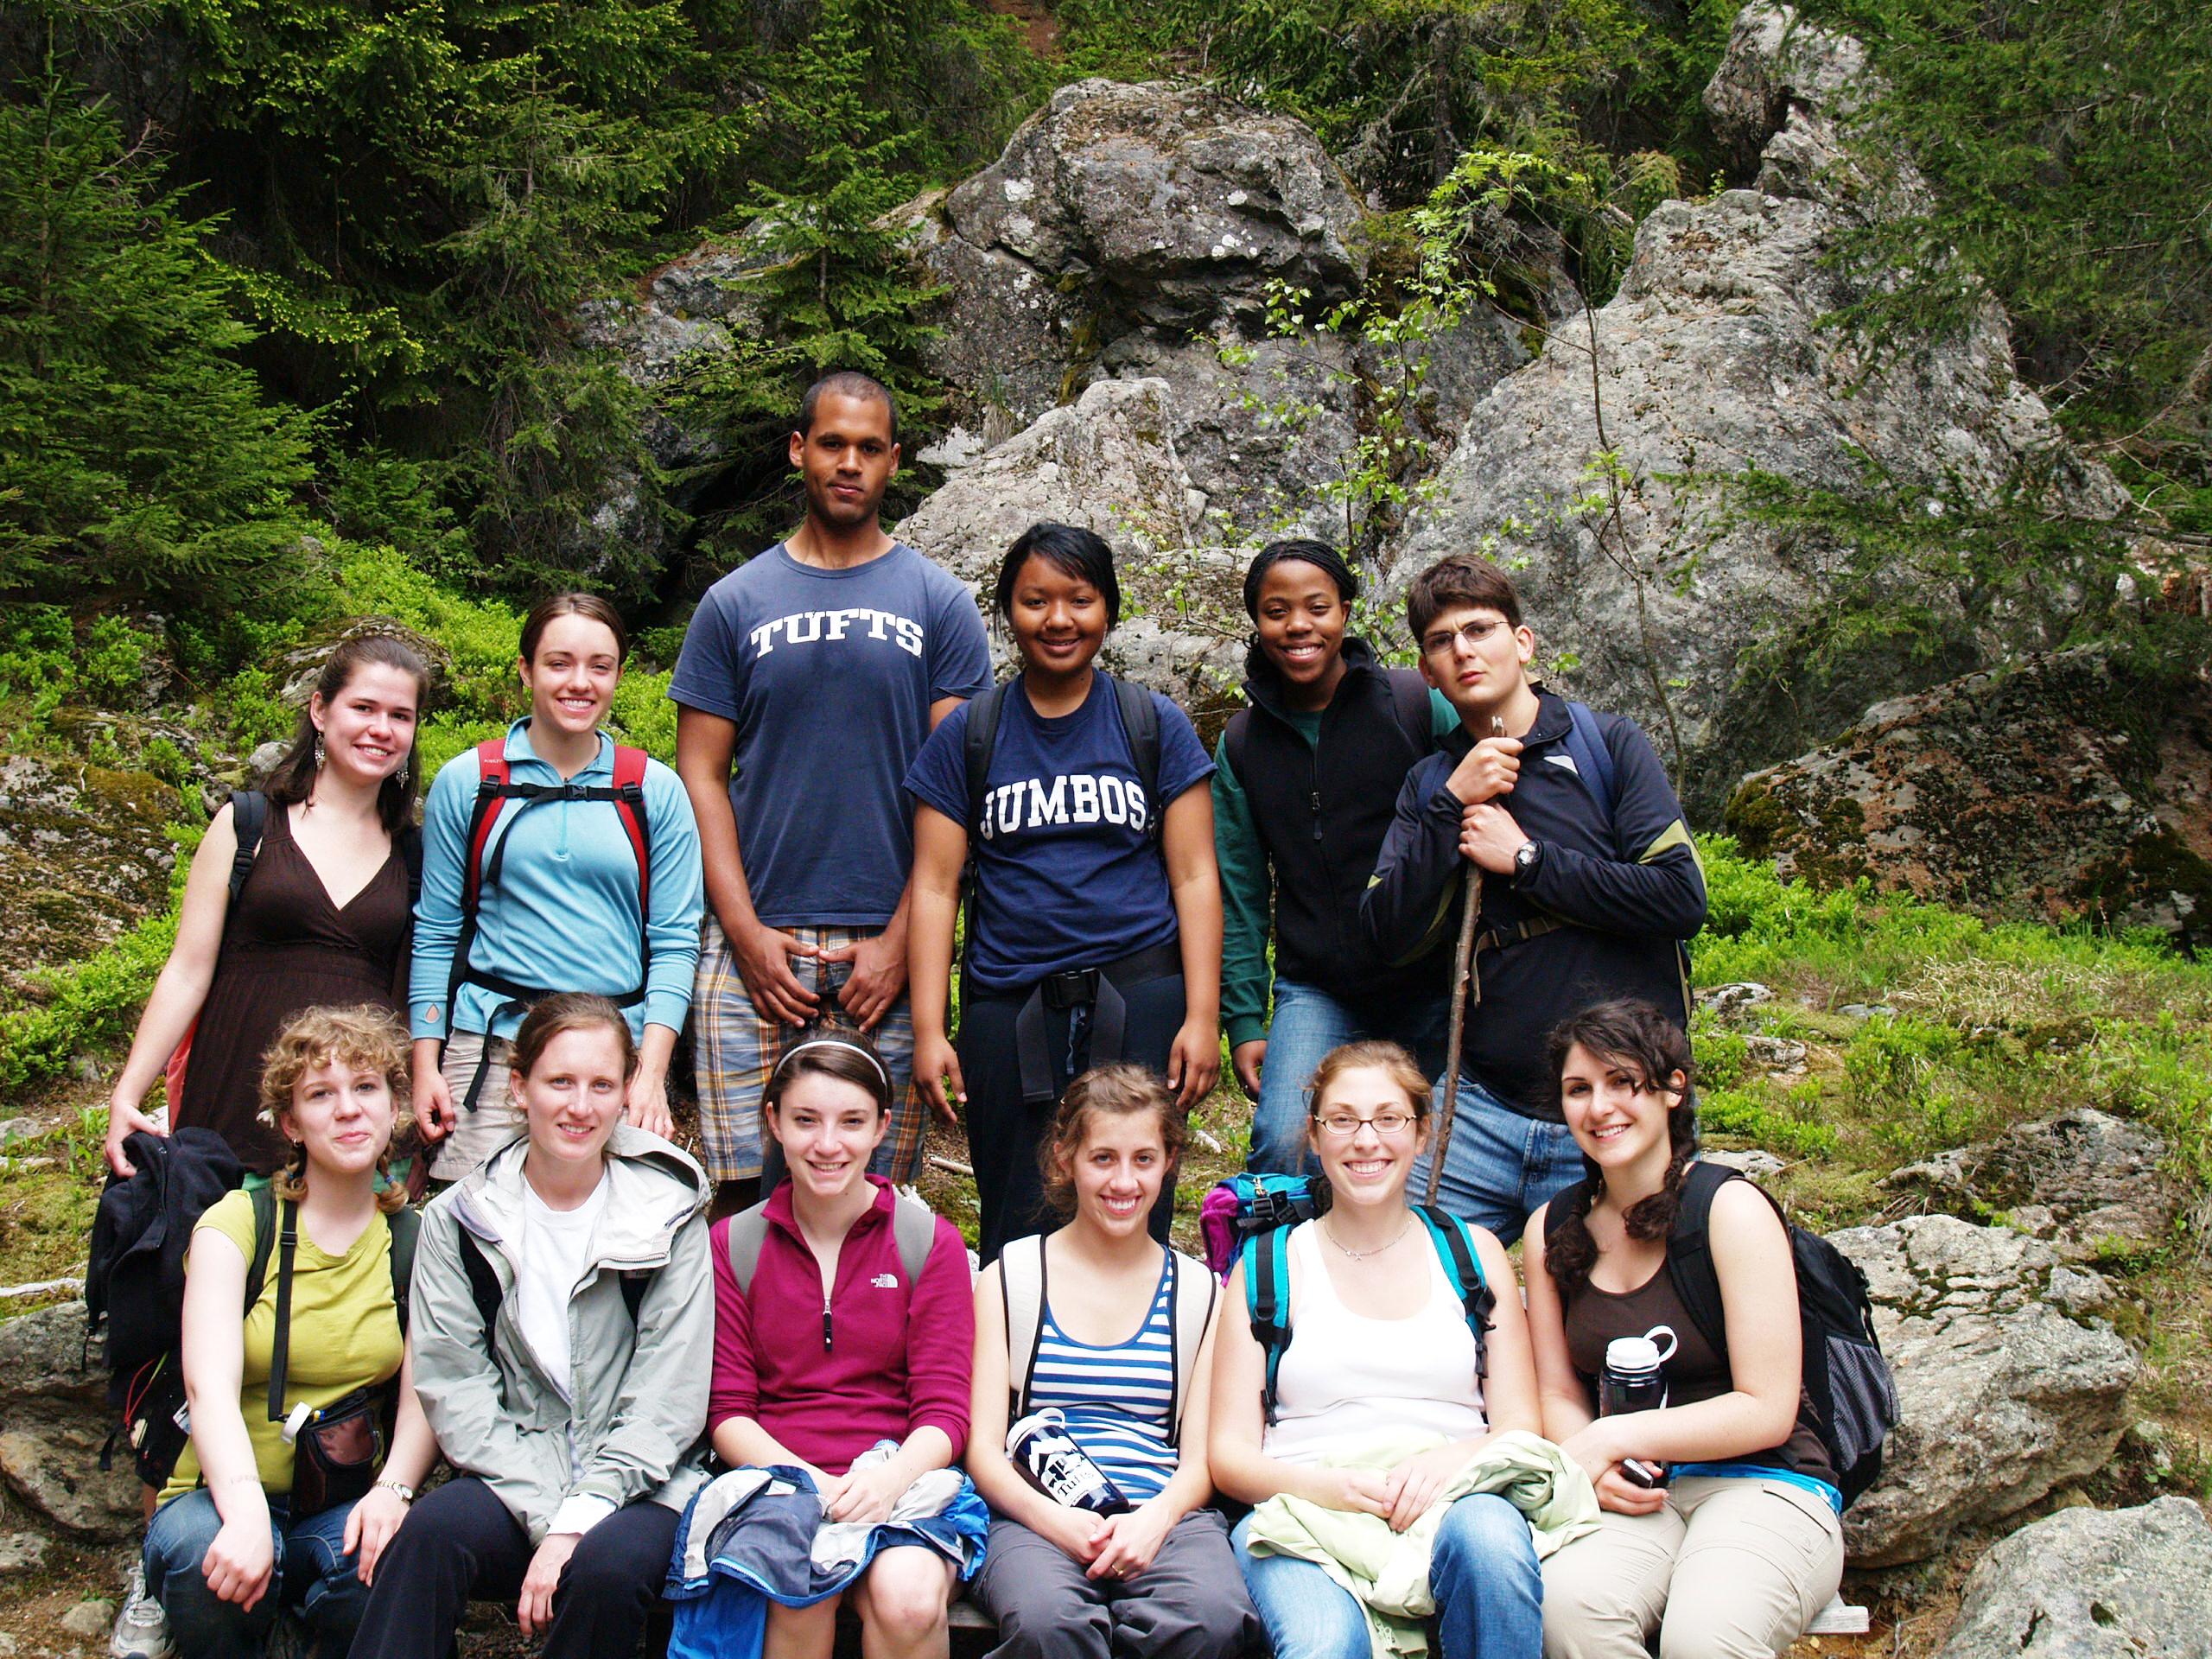 Students posing in two rows on a hike